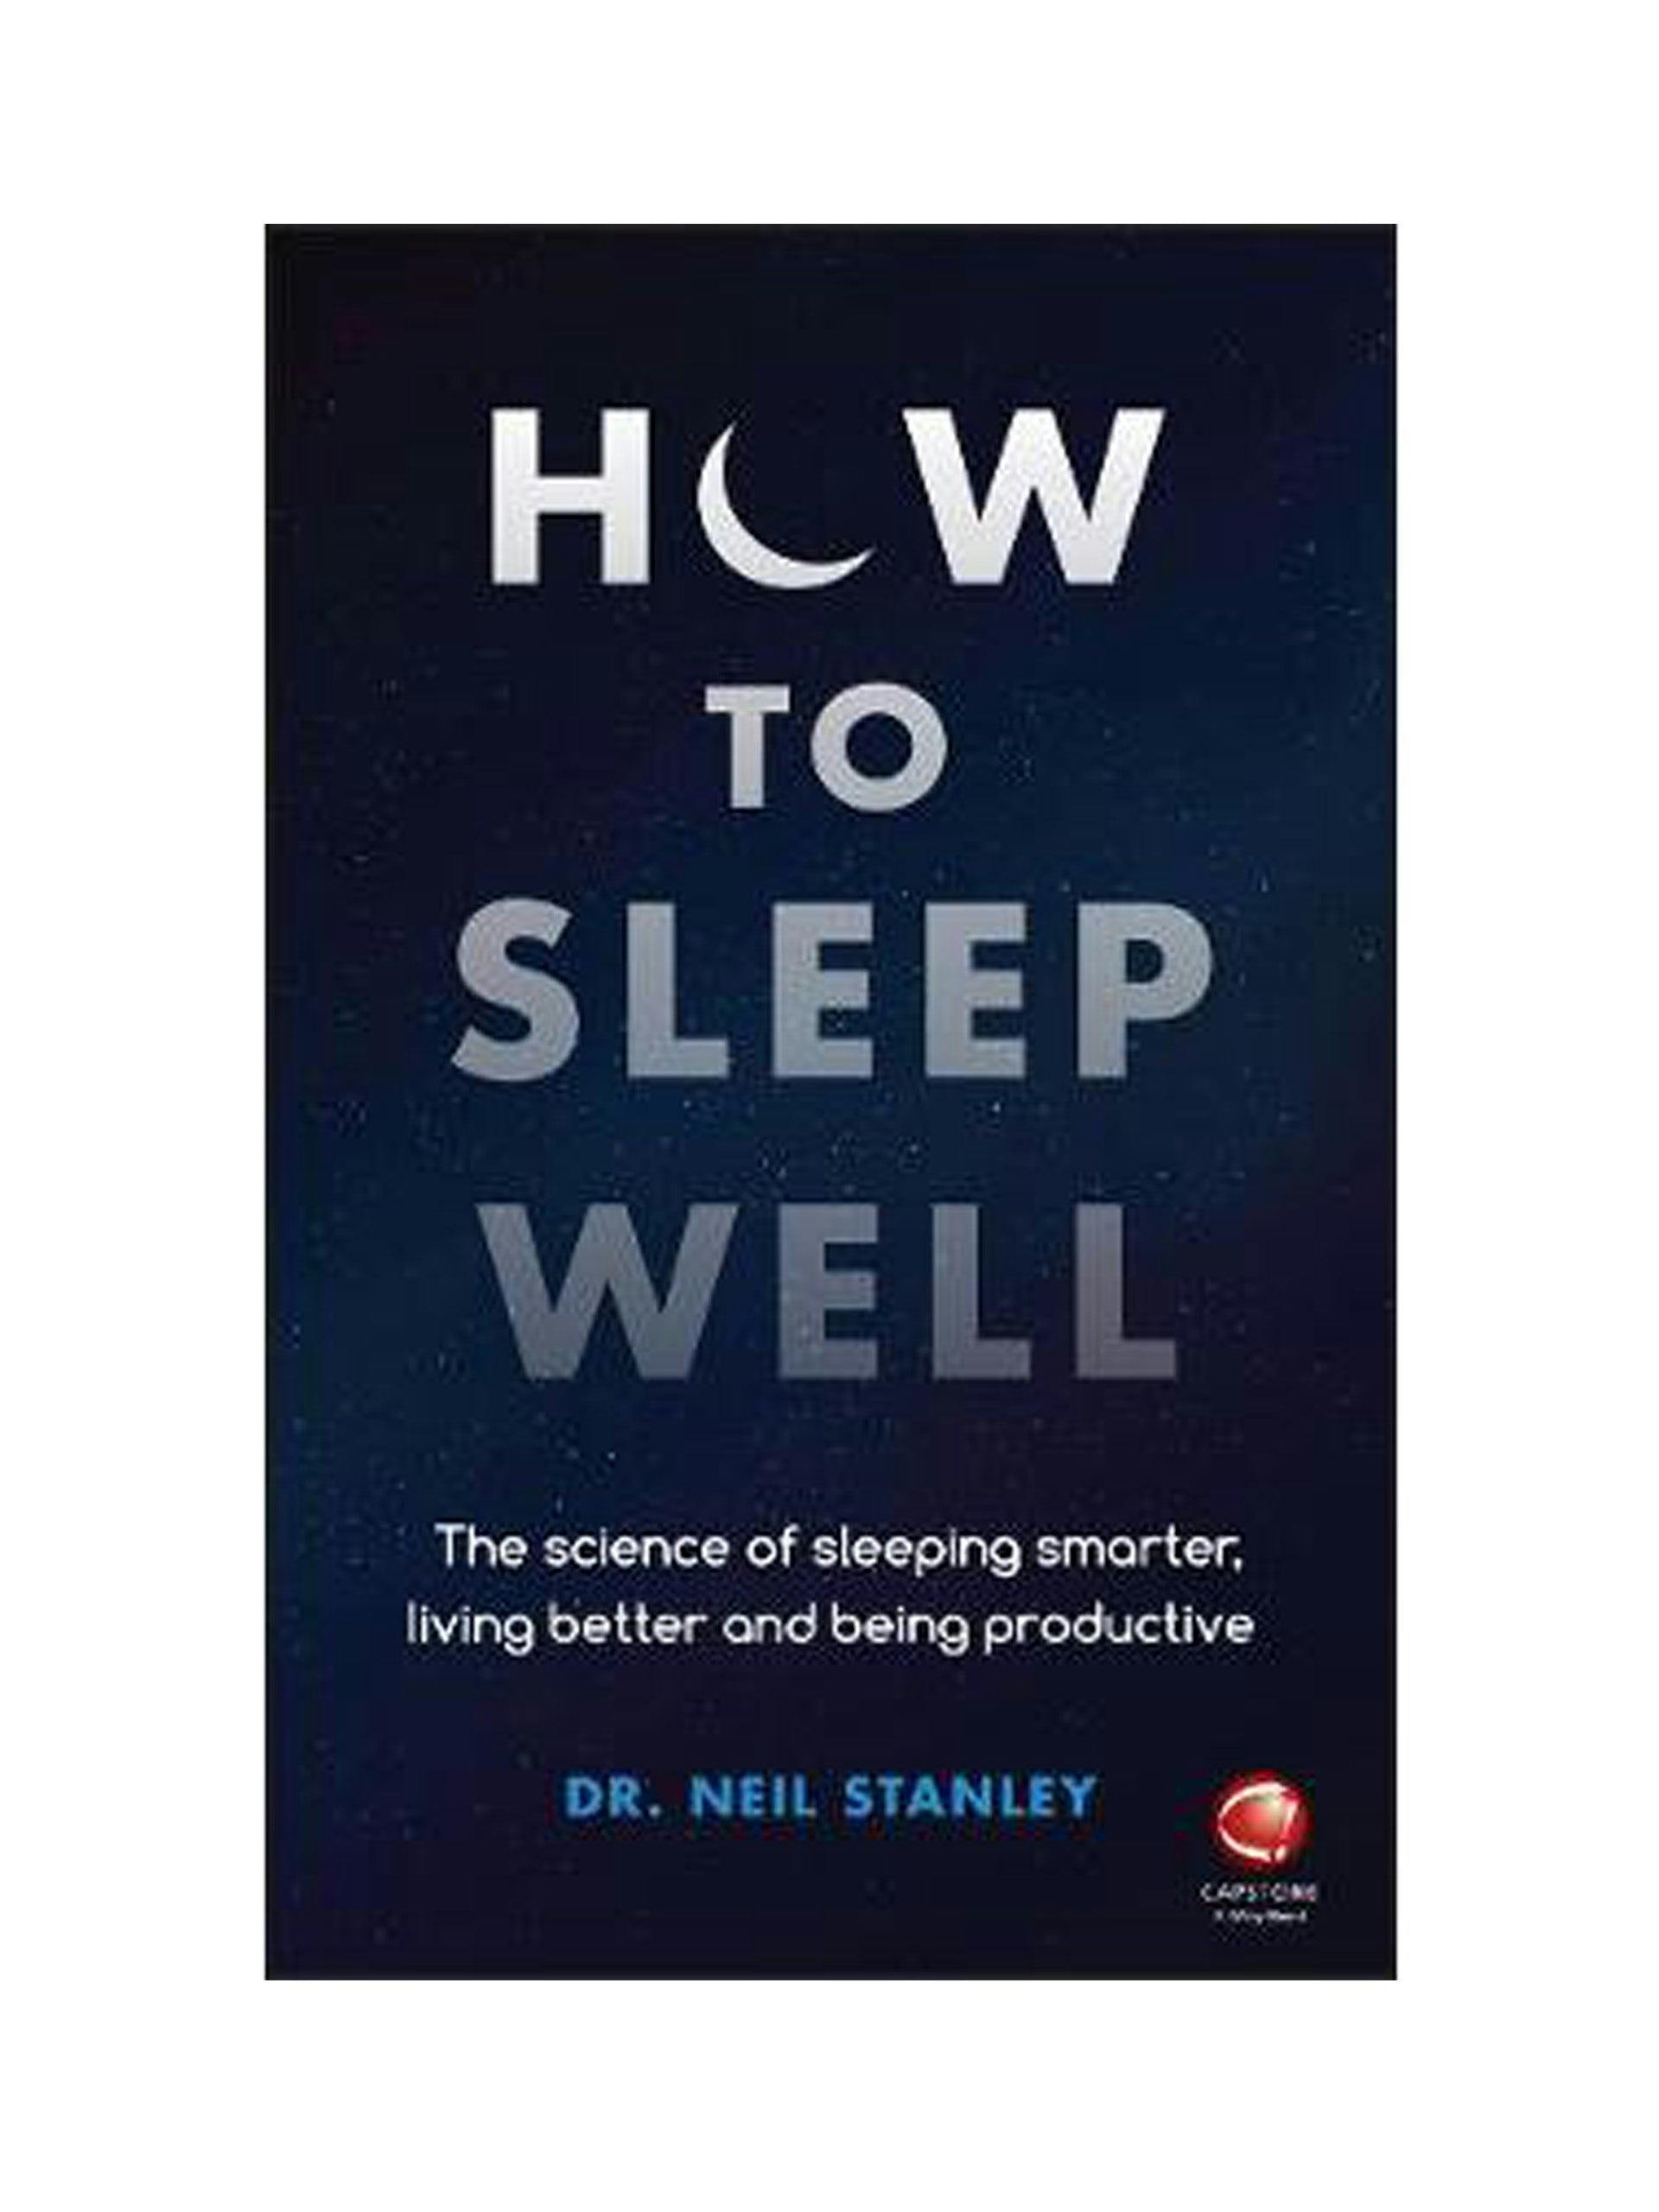 Paperback book by Dr. Neil Stanley